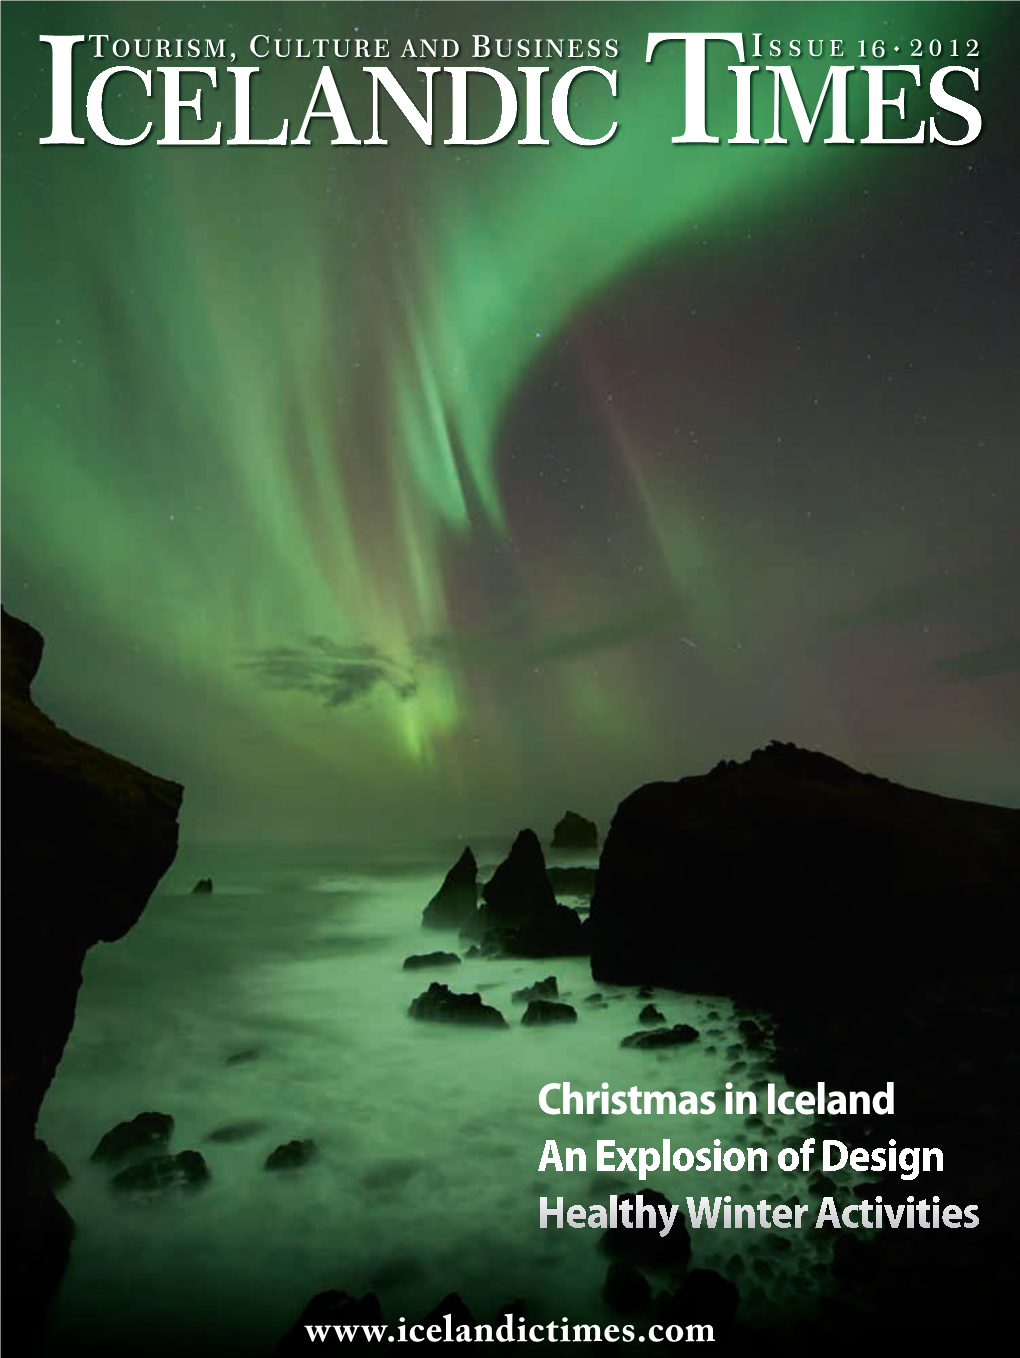 Christmas in Iceland an Explosion of Design Healthy Winter Activities